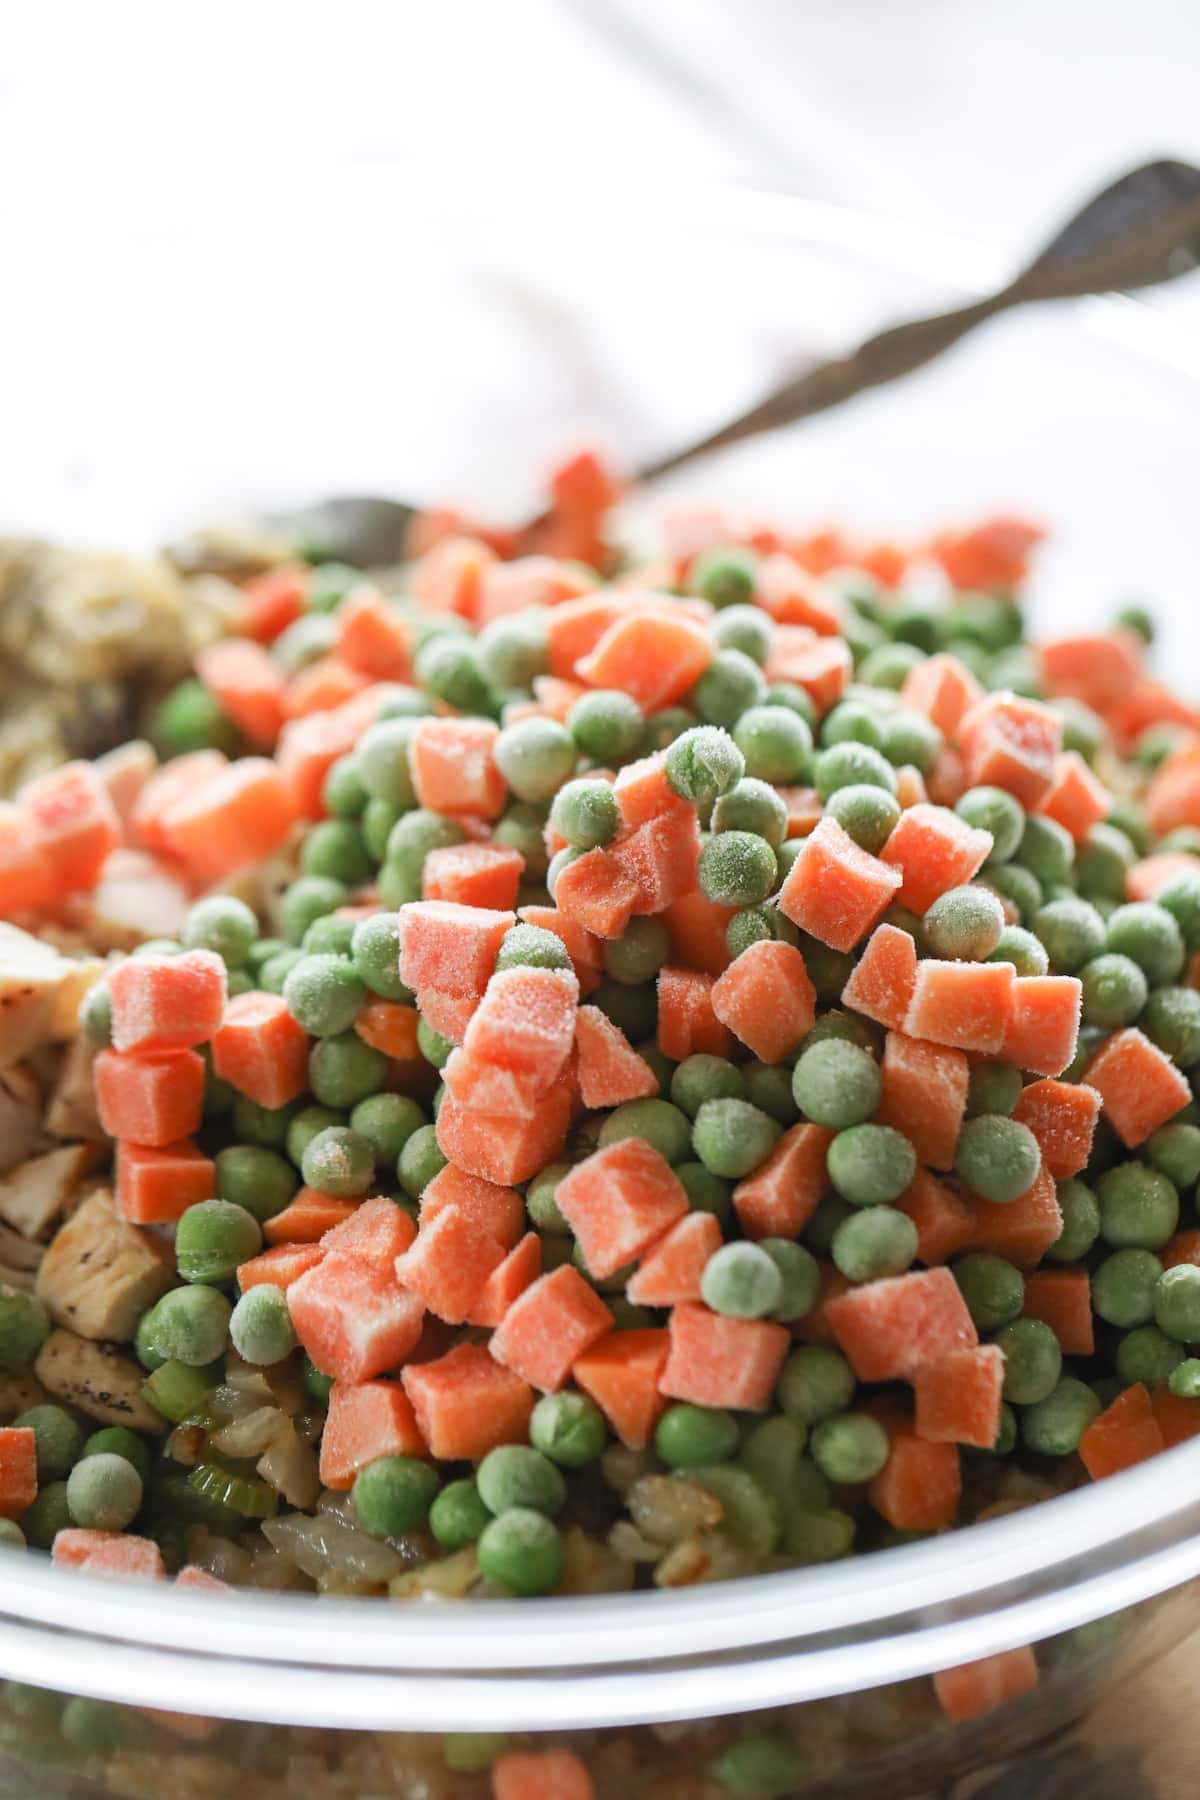 frozen peas and carrots added into bowl for casserole